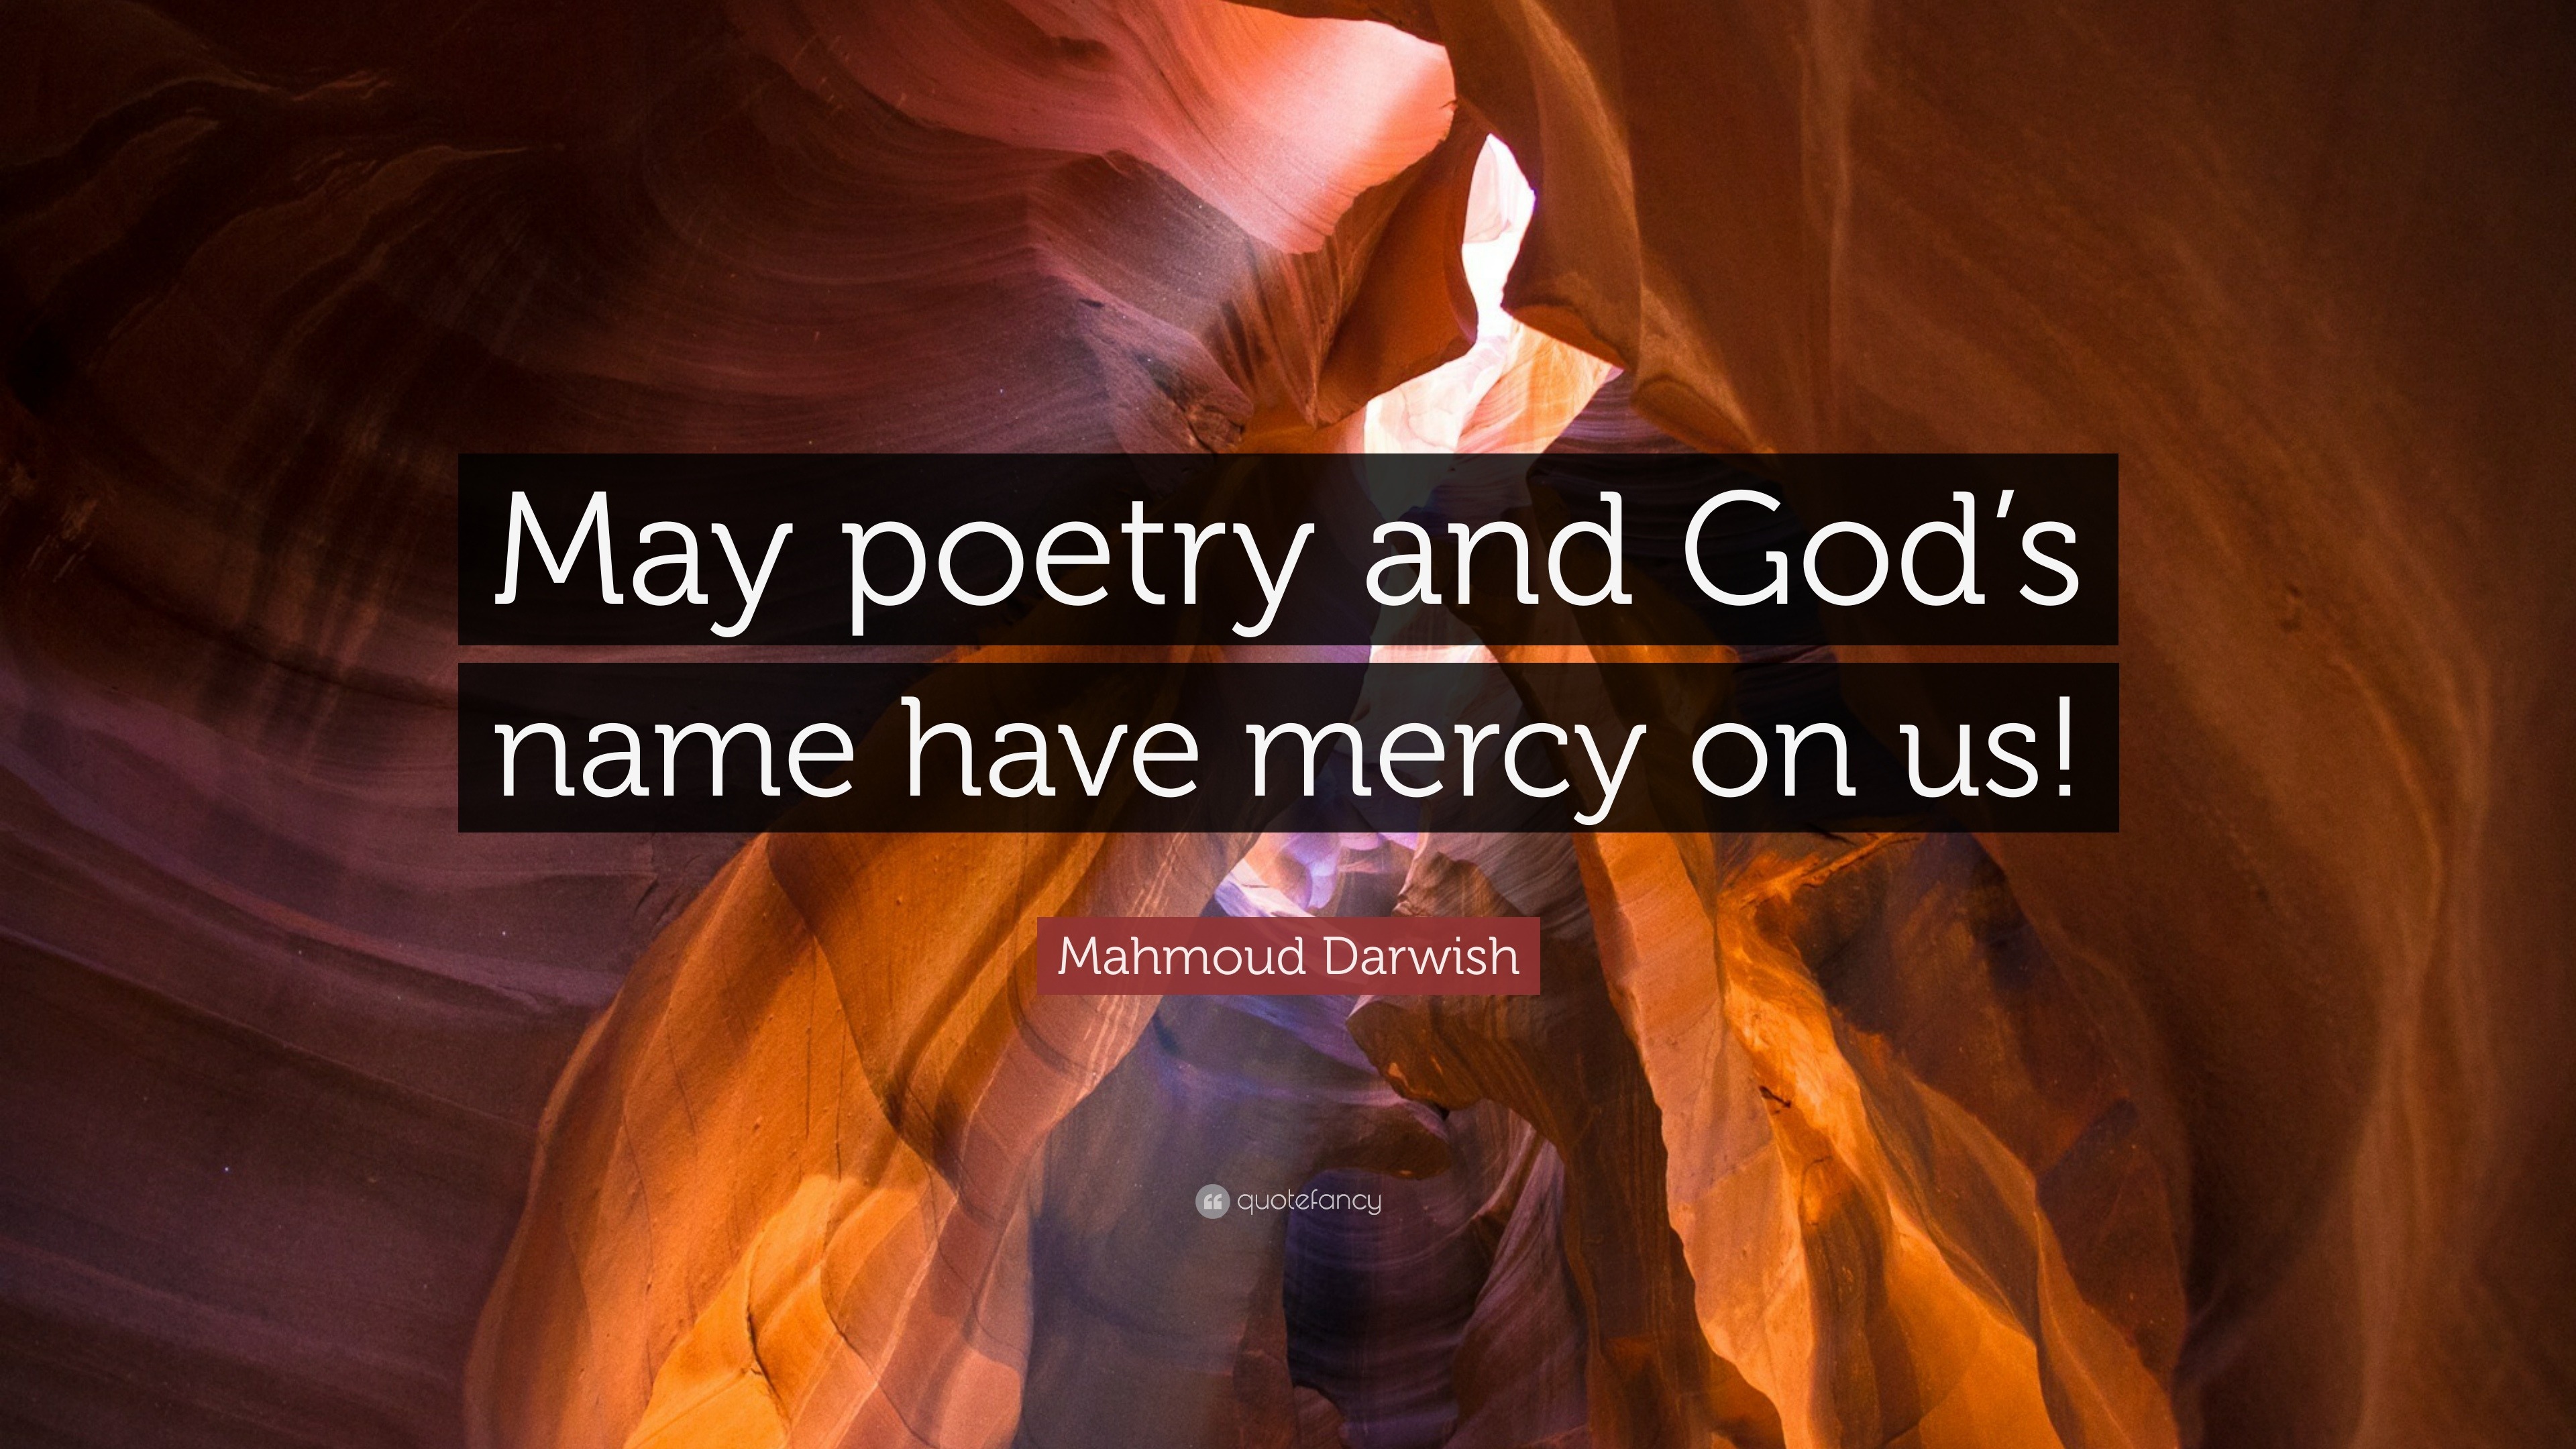 Mahmoud Darwish Quote: “May poetry and God's name have mercy on us!”